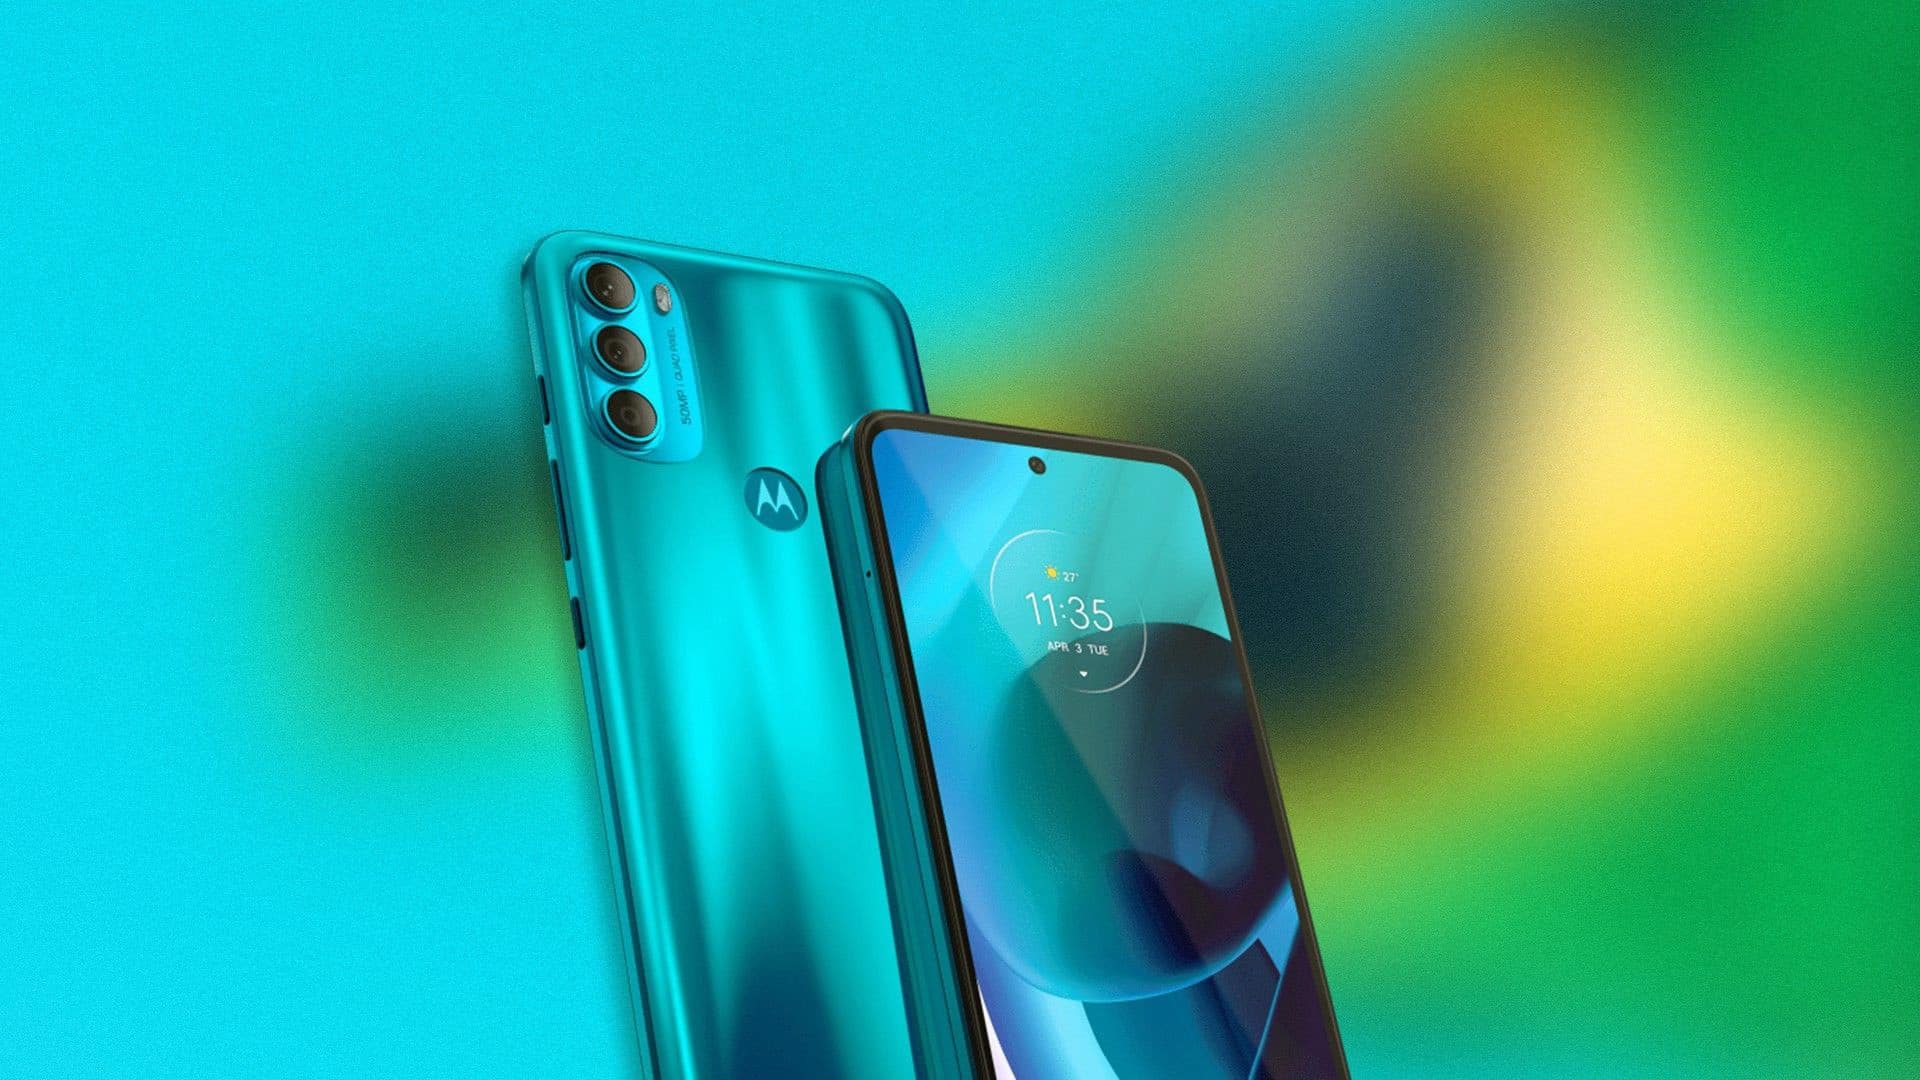 The Motorola's moto g71 5G With India's First Snapdragon 695 5G Processor, Goes on Sale Today on Flipkart